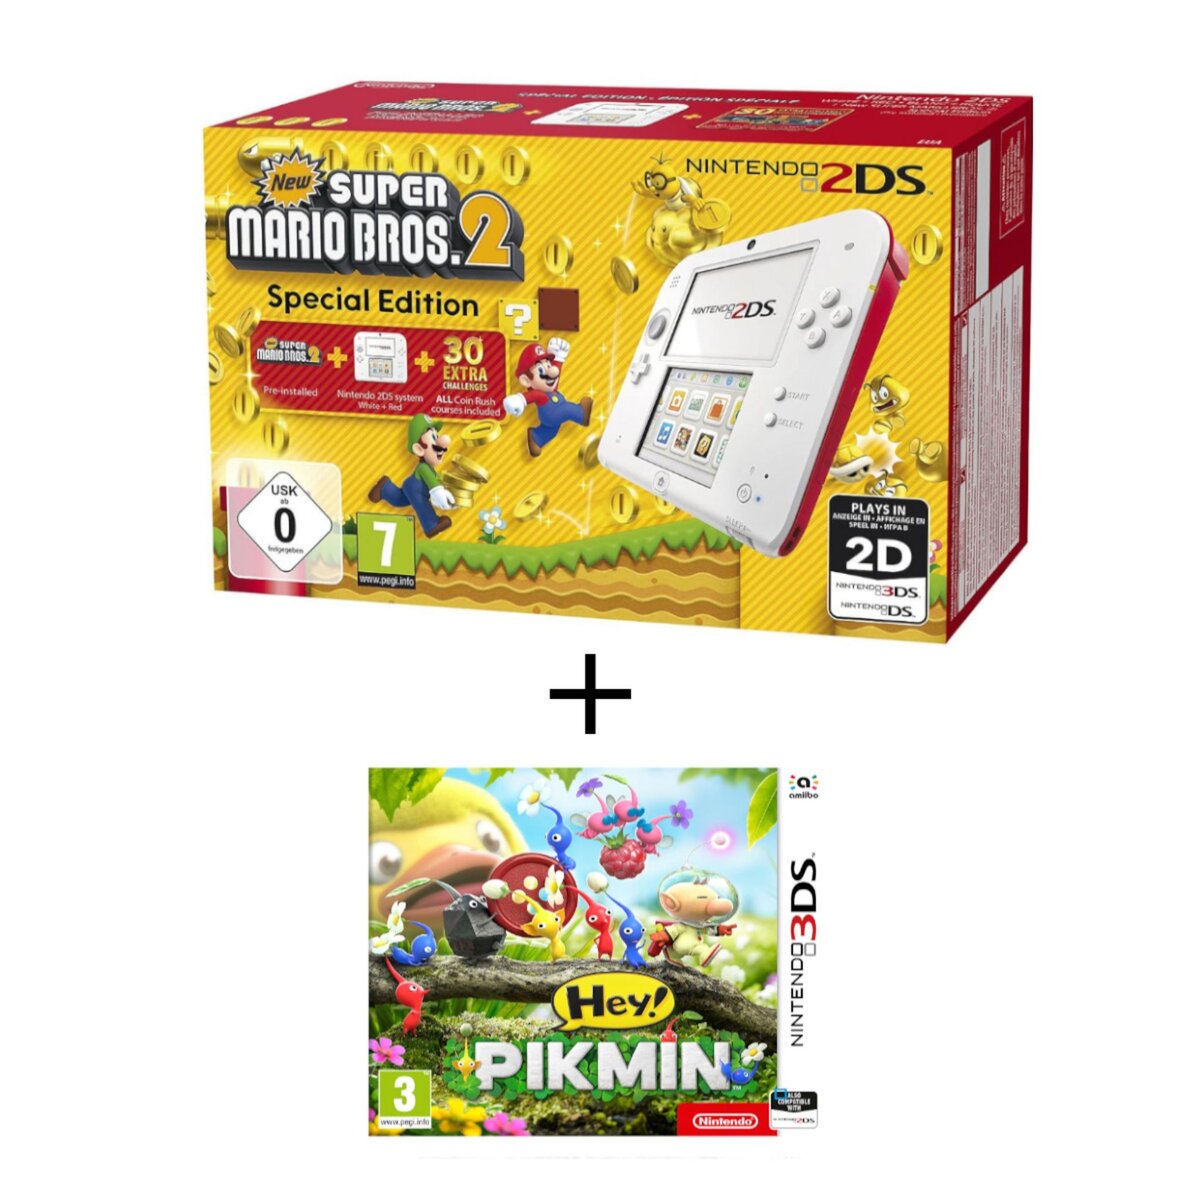 Console 2DS New Super Mario Bros 2 + Hey Pikmin 3DS